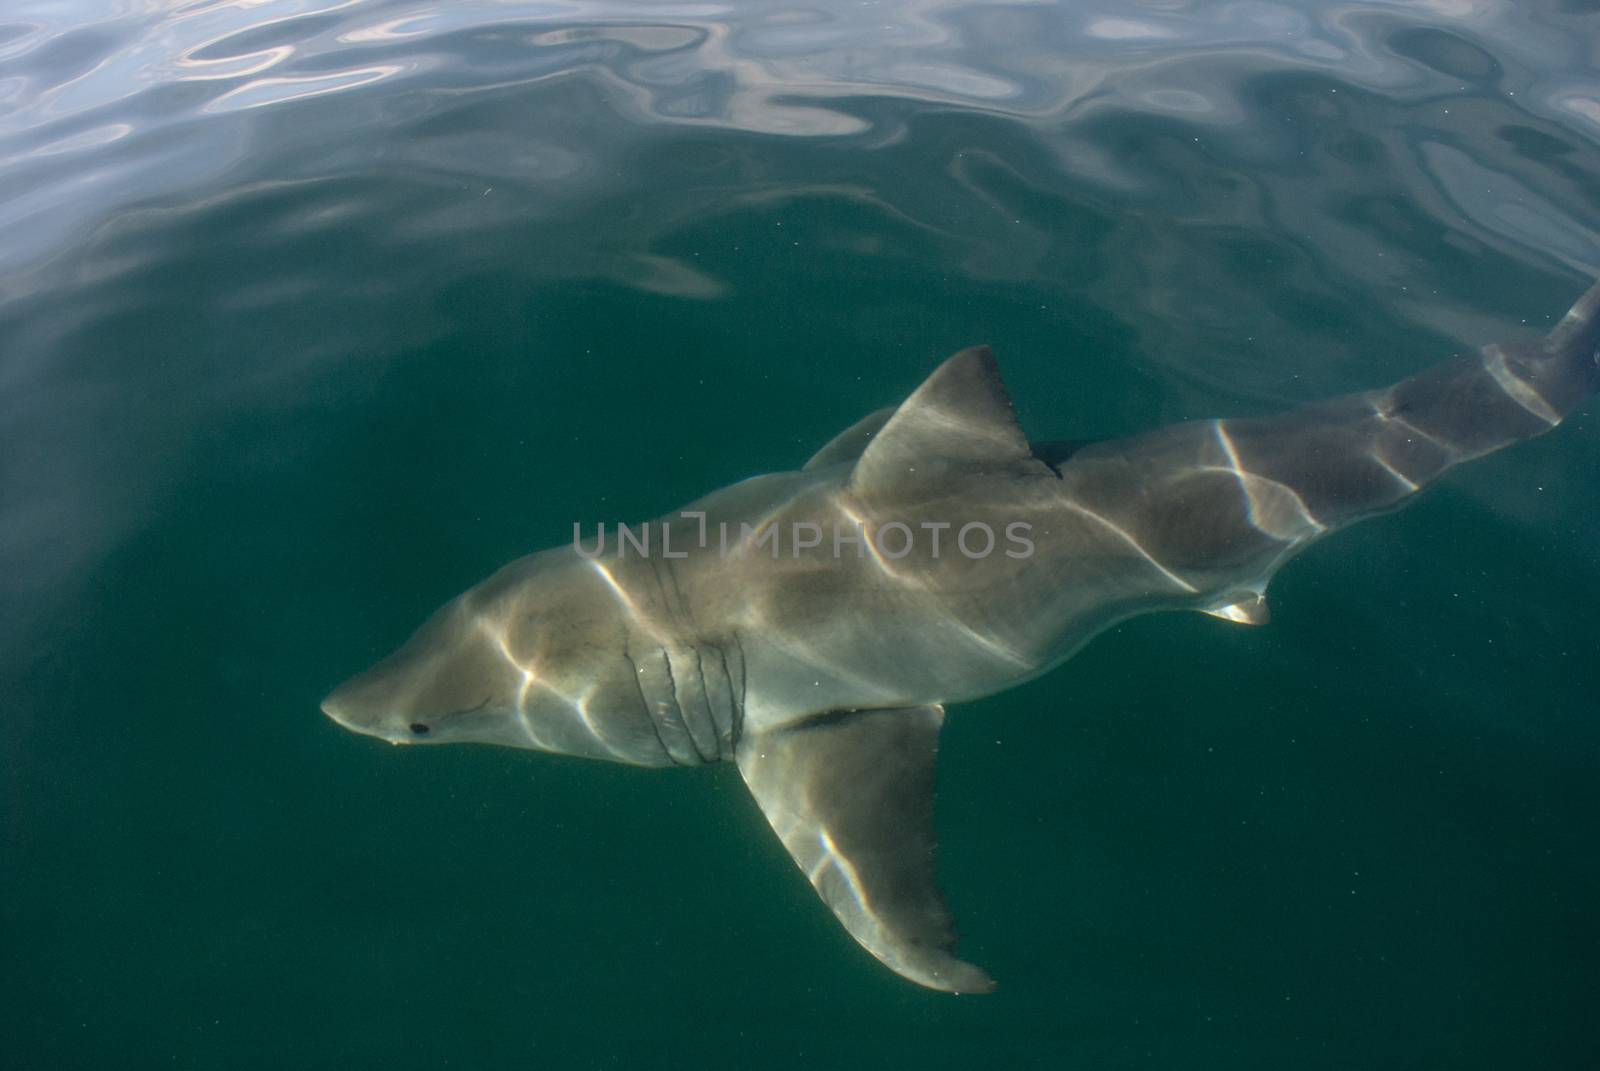 A great white shark underwater in Gansbaai, South Africa